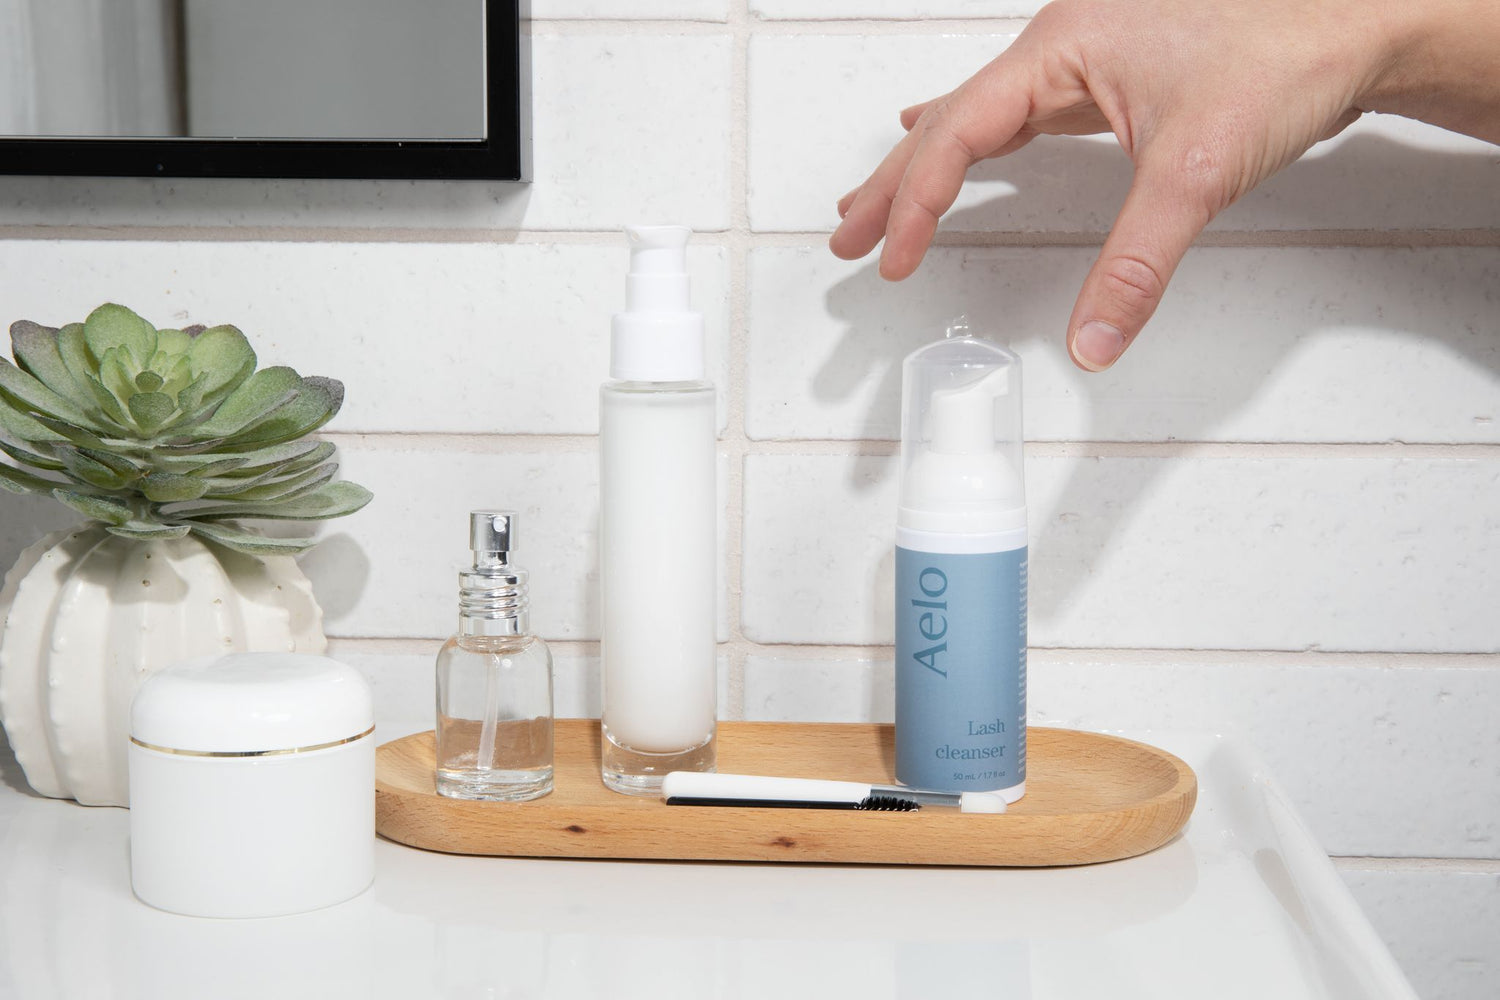 Aelo Eyelid and Eyelash Cleanser in Bathroom Background with Model Hand